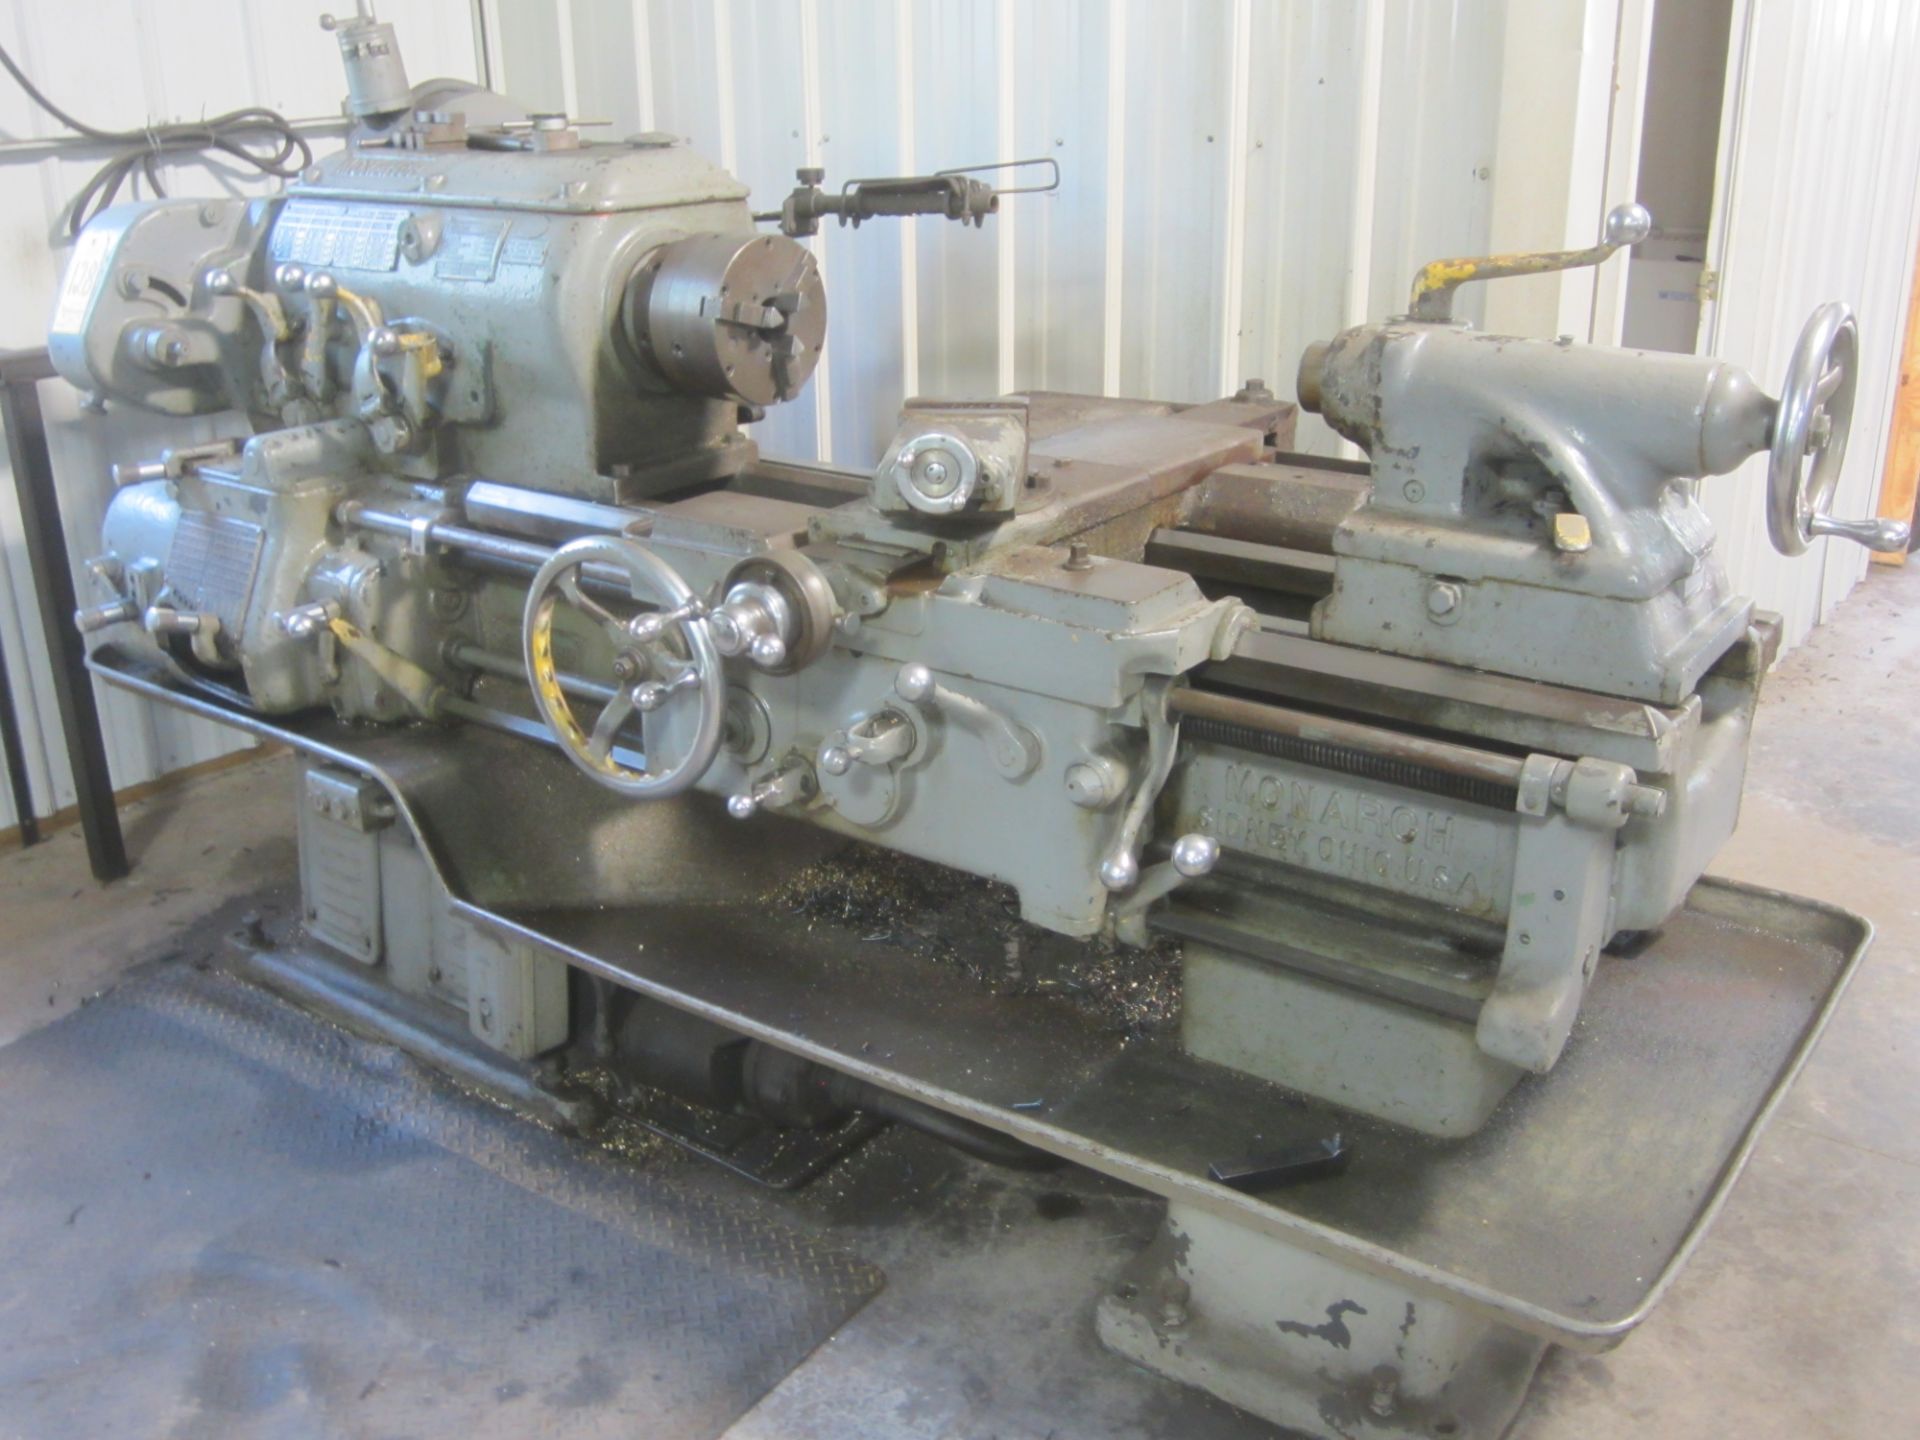 Monarch Model 16”CY Engine Lathe, s/n 22180, 18.5” X 36” Capacity, Taper Attachment, 8” 3-Jaw Chuck